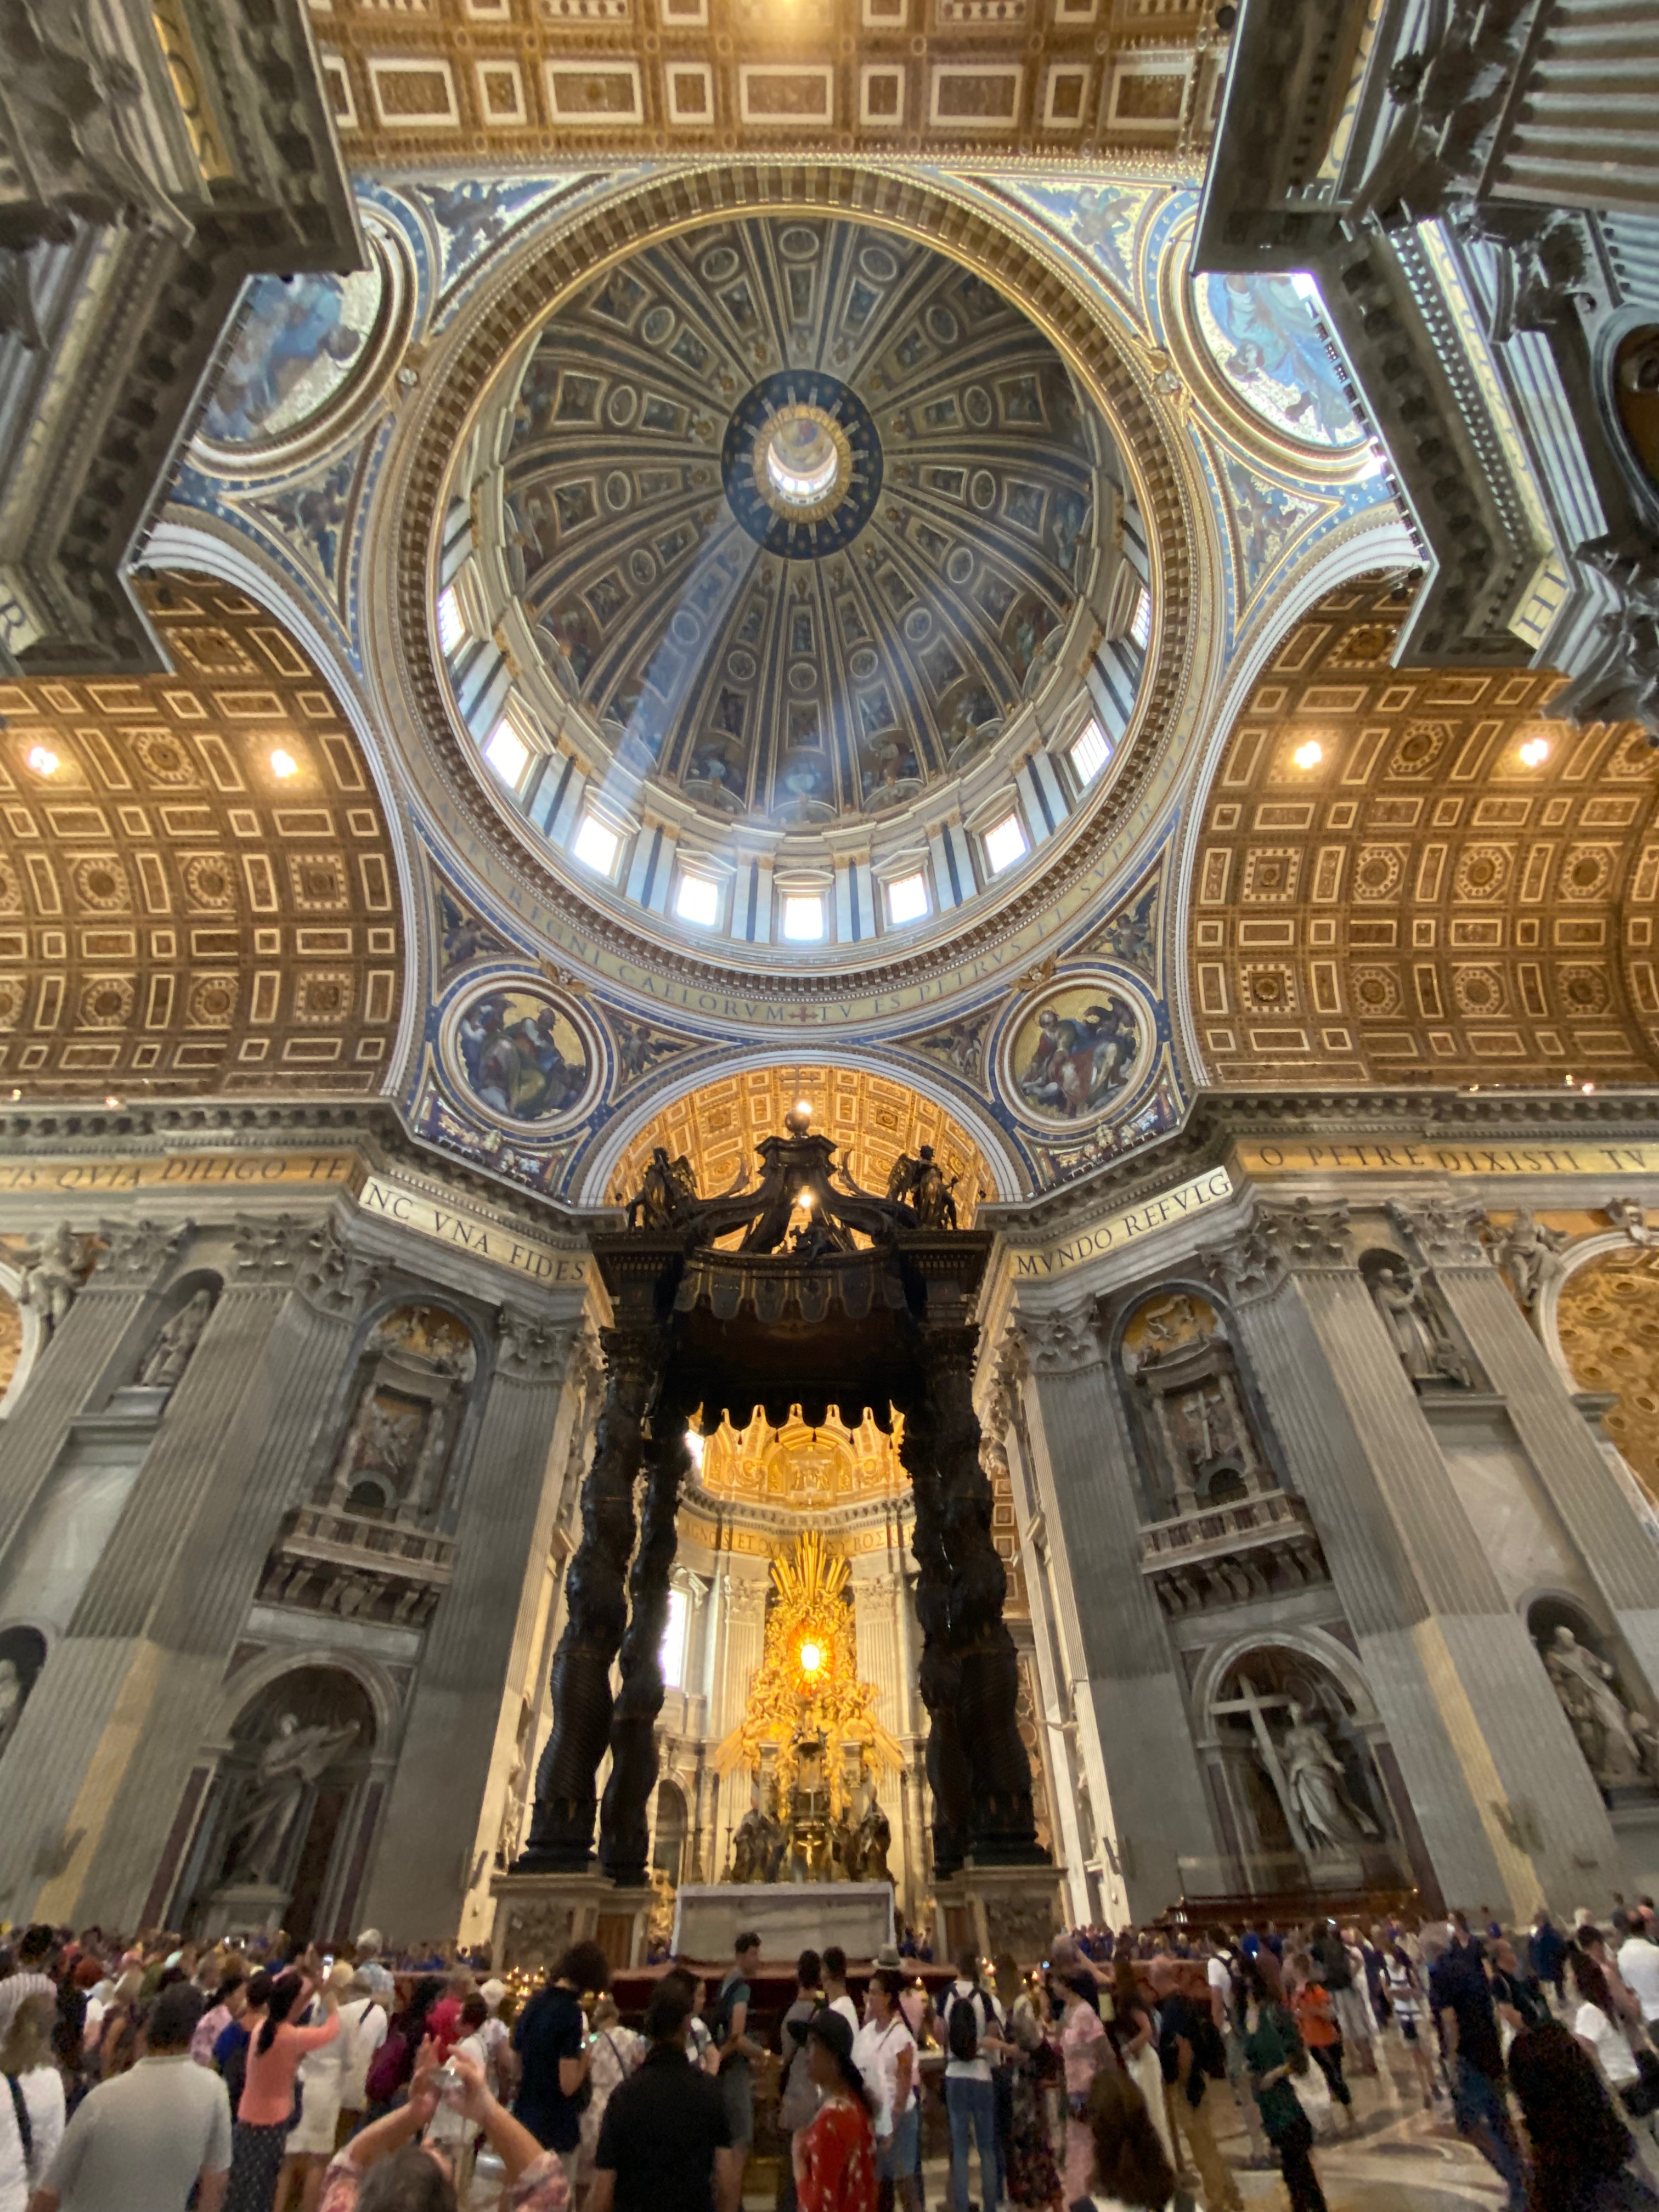 The altar of St. Peter's Basilica, and a view of the roof.